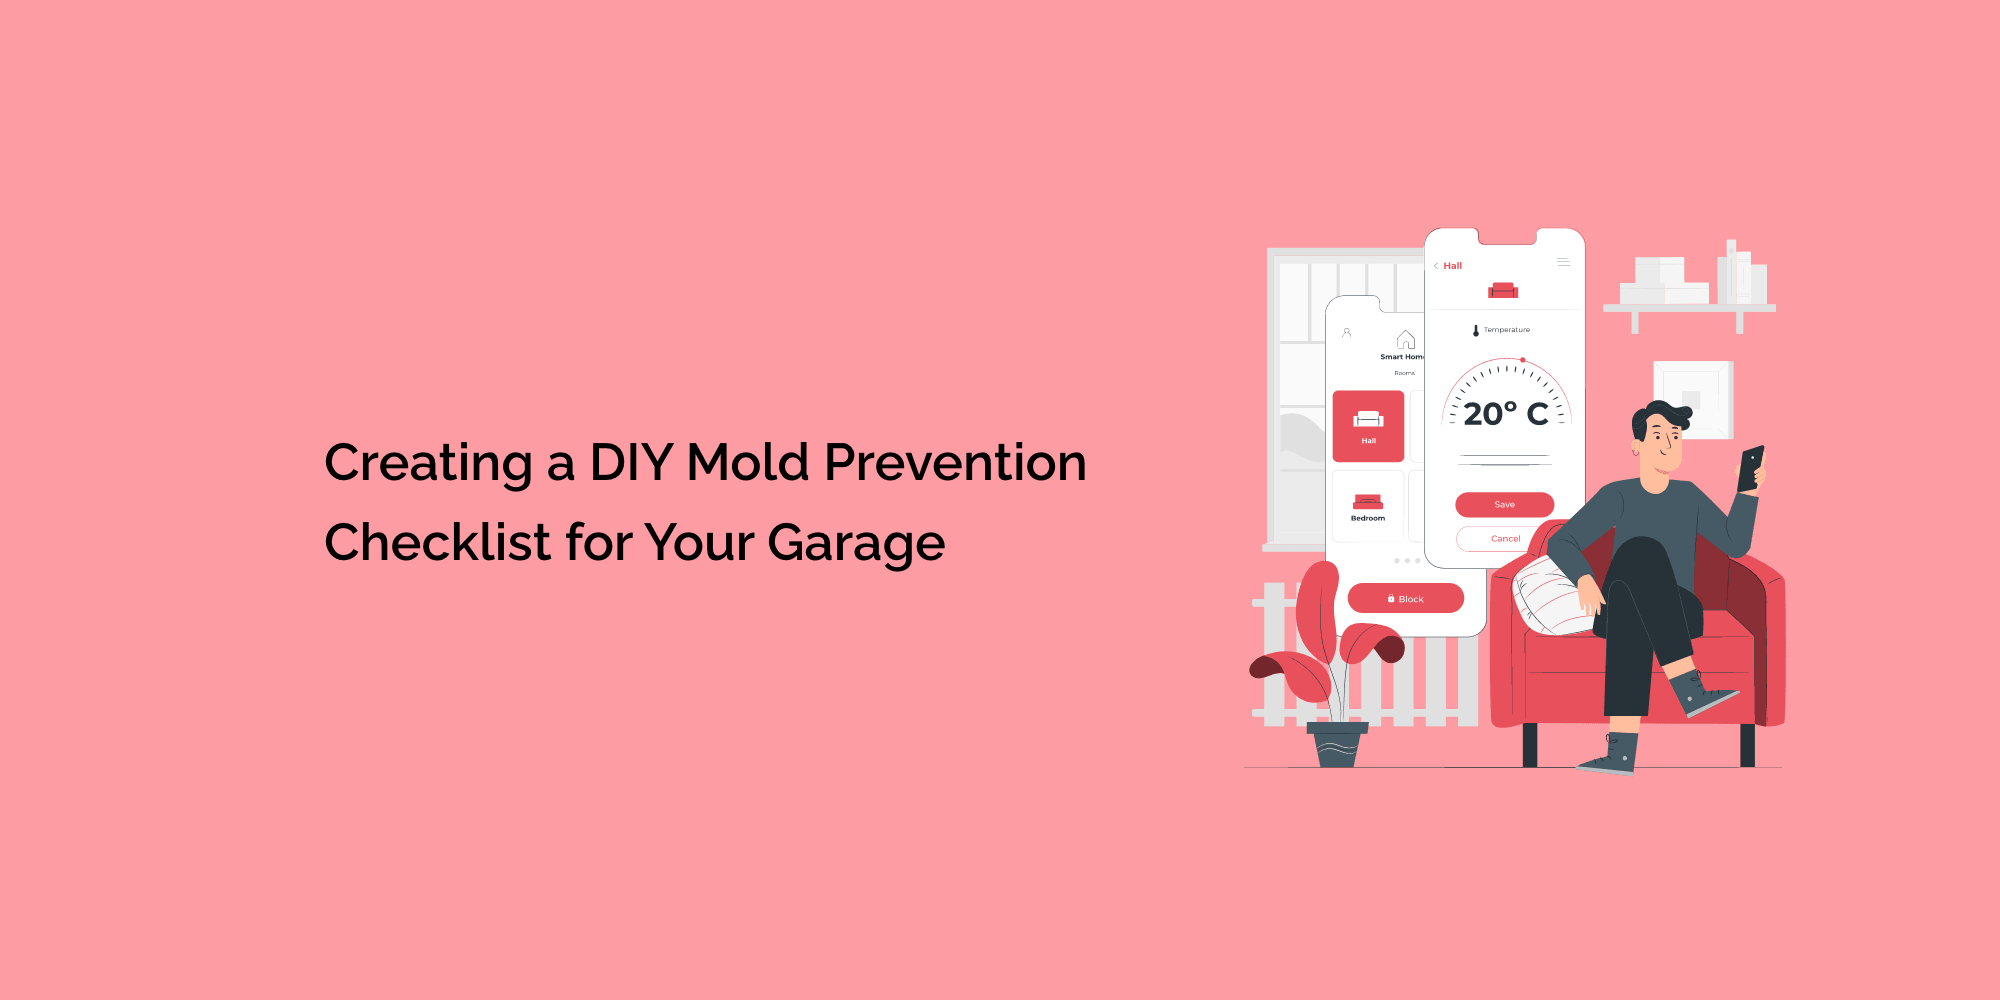 Creating a DIY Mold Prevention Checklist for Your Garage